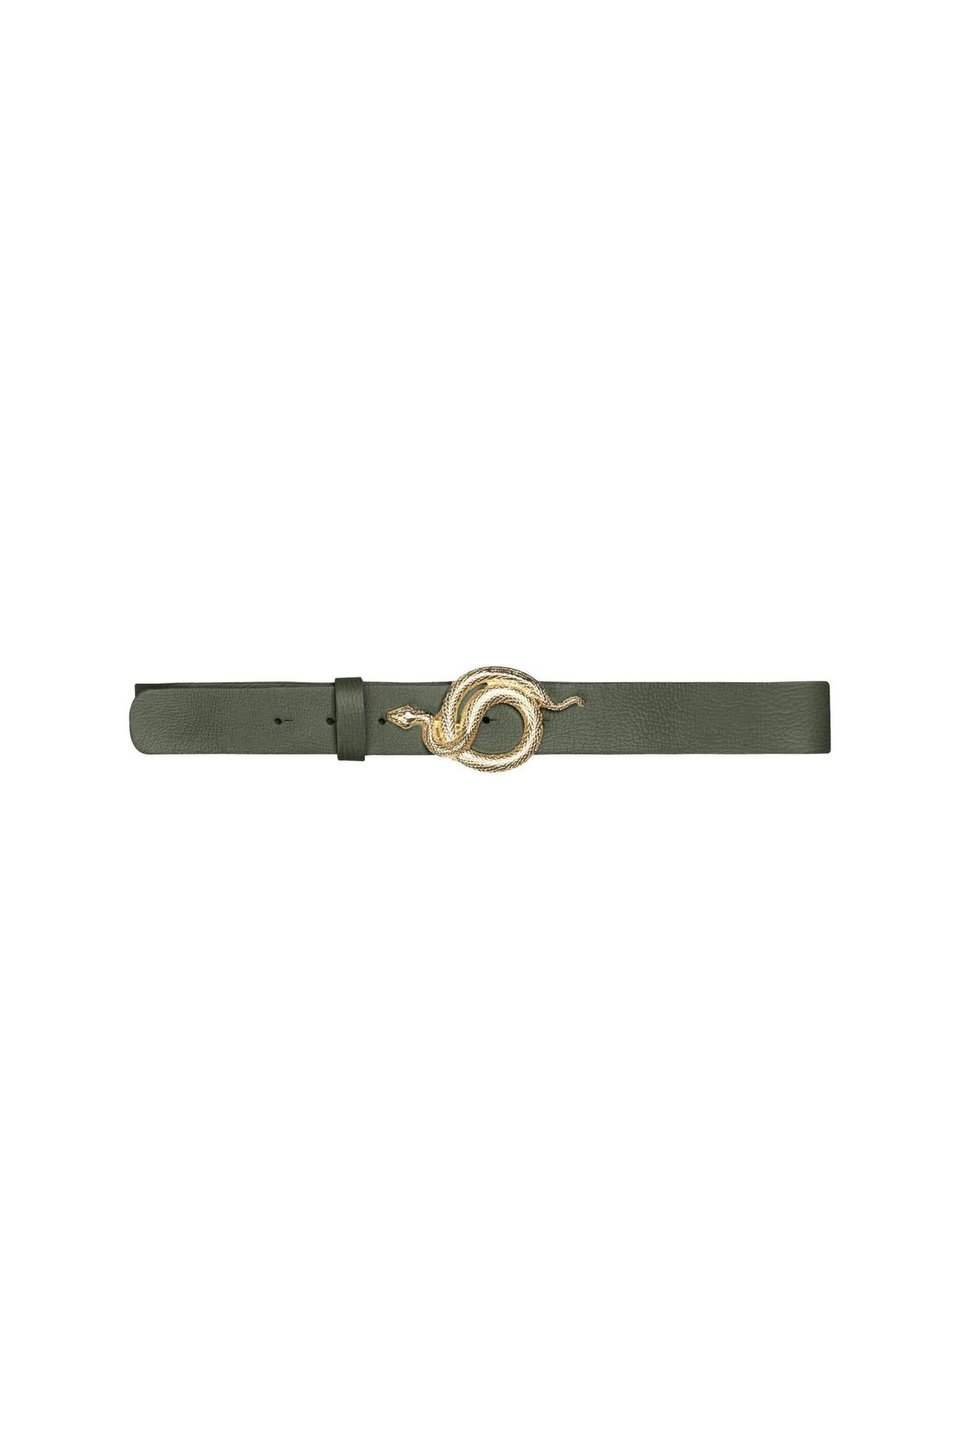 Notes Du Nord Milo Leather Belt - Army/Gold